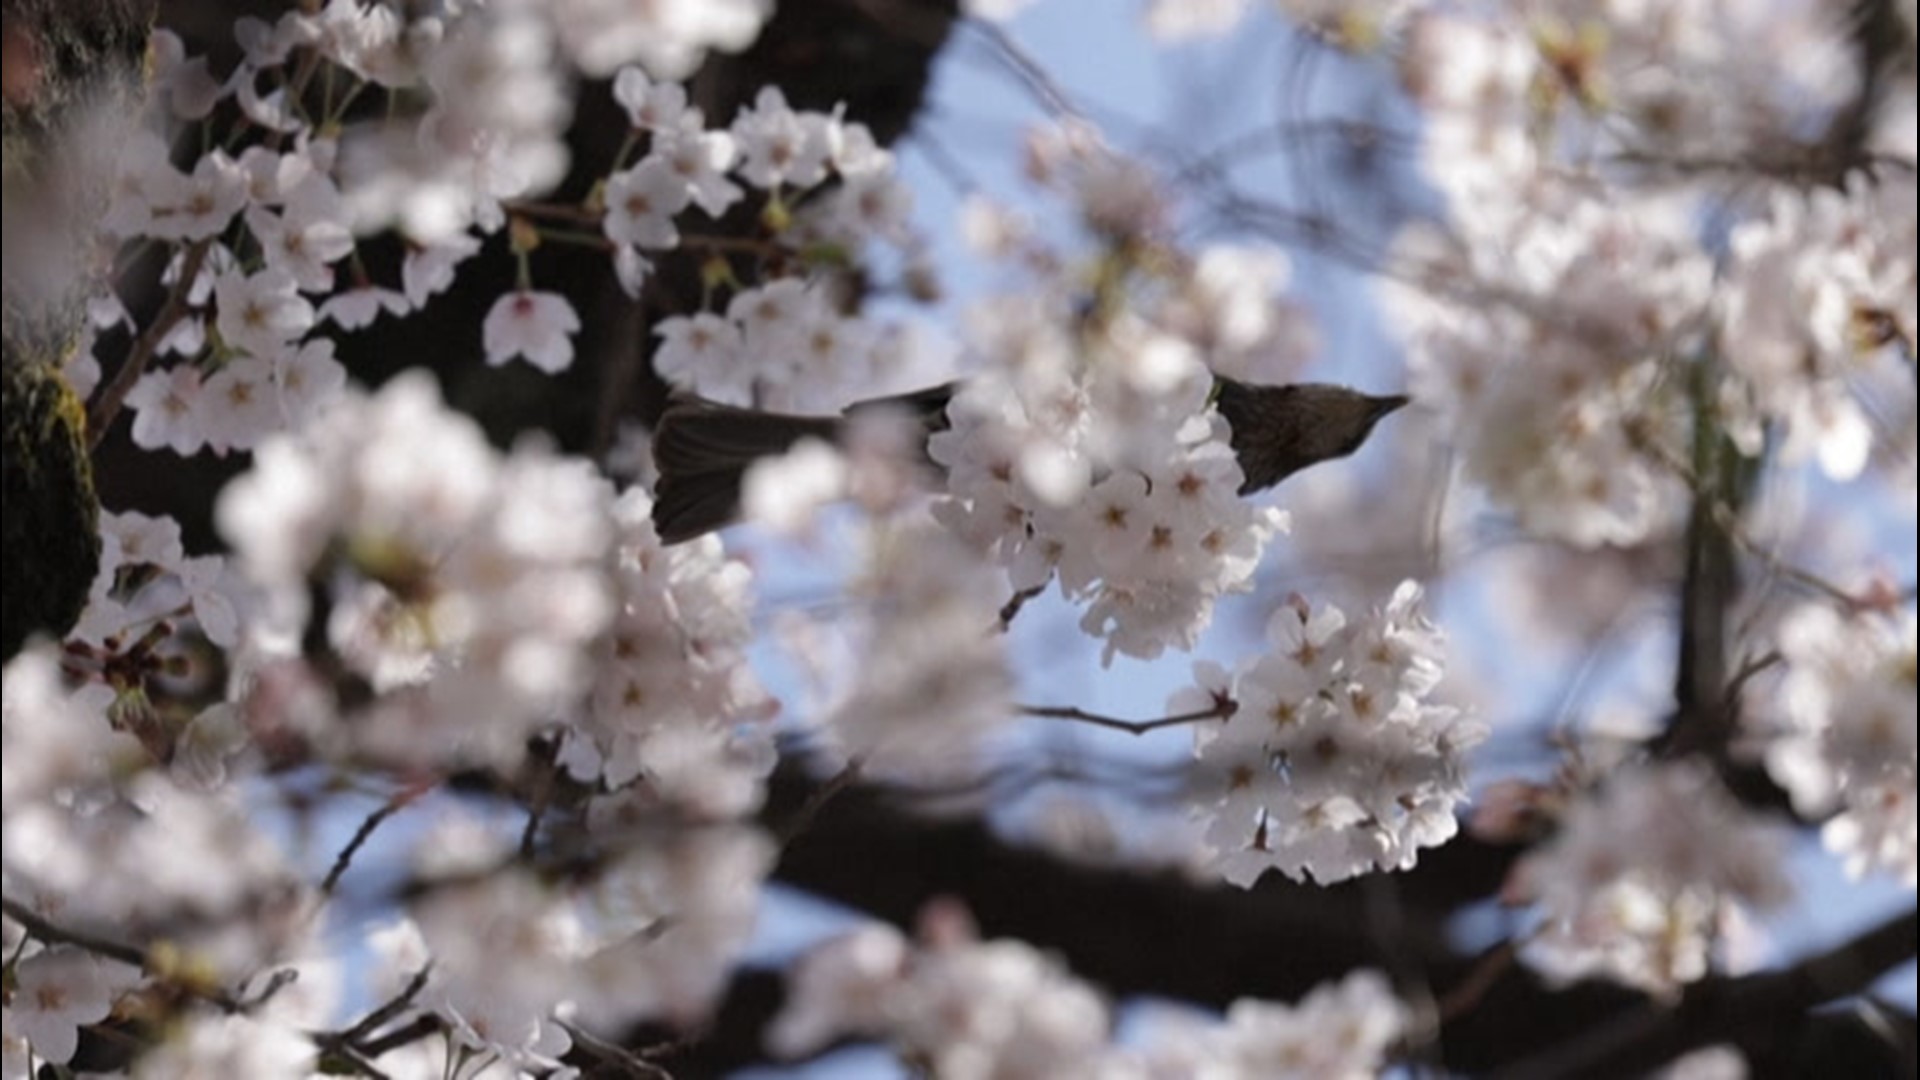 Climate change makes Japan's famous cherry blossoms bloom early